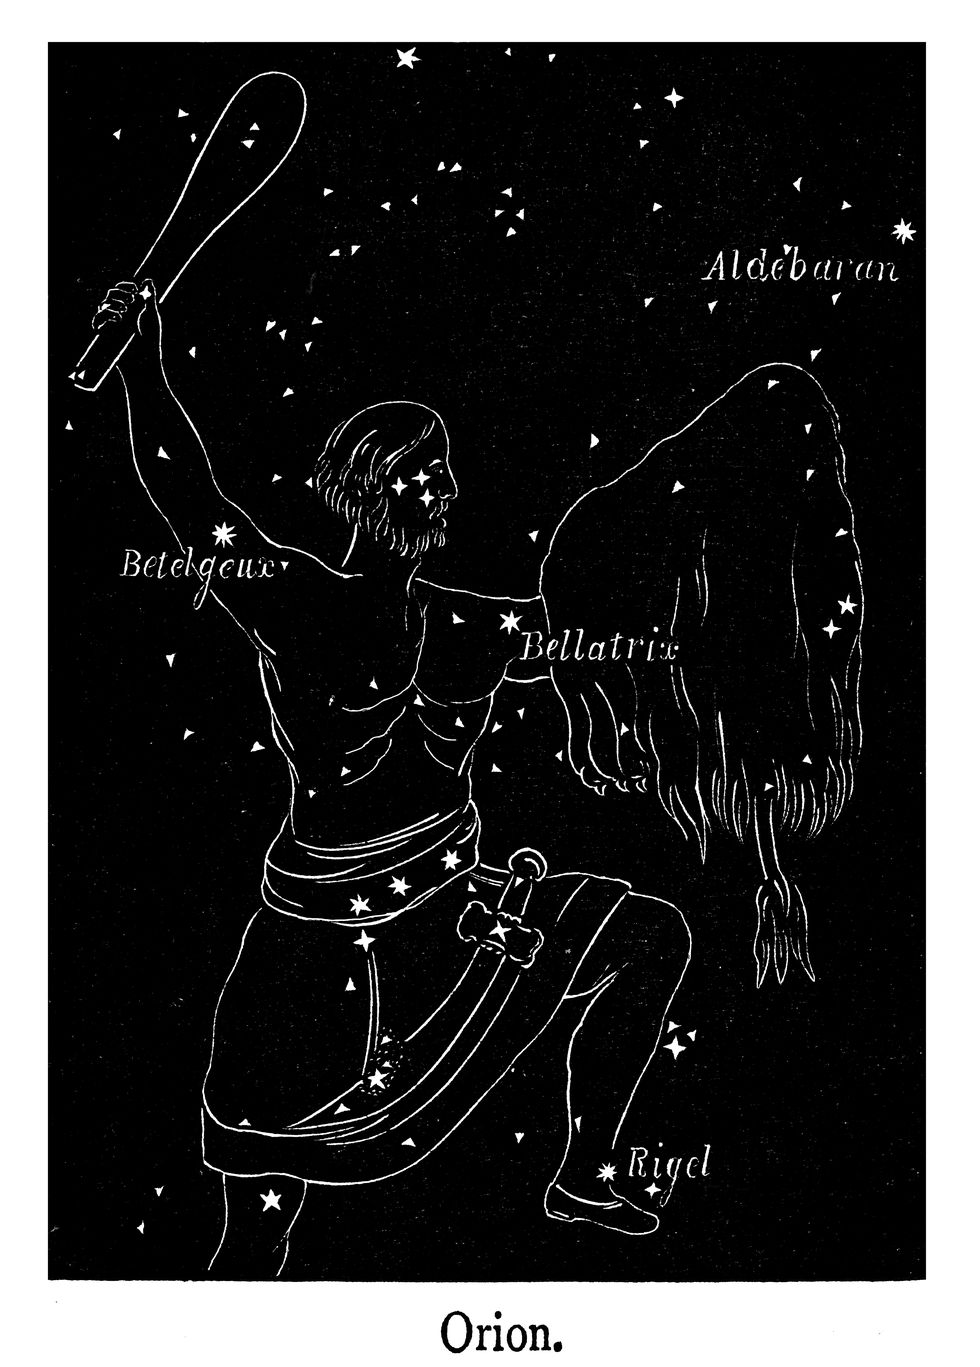 old engraved illustration of astronomy, orion constellation